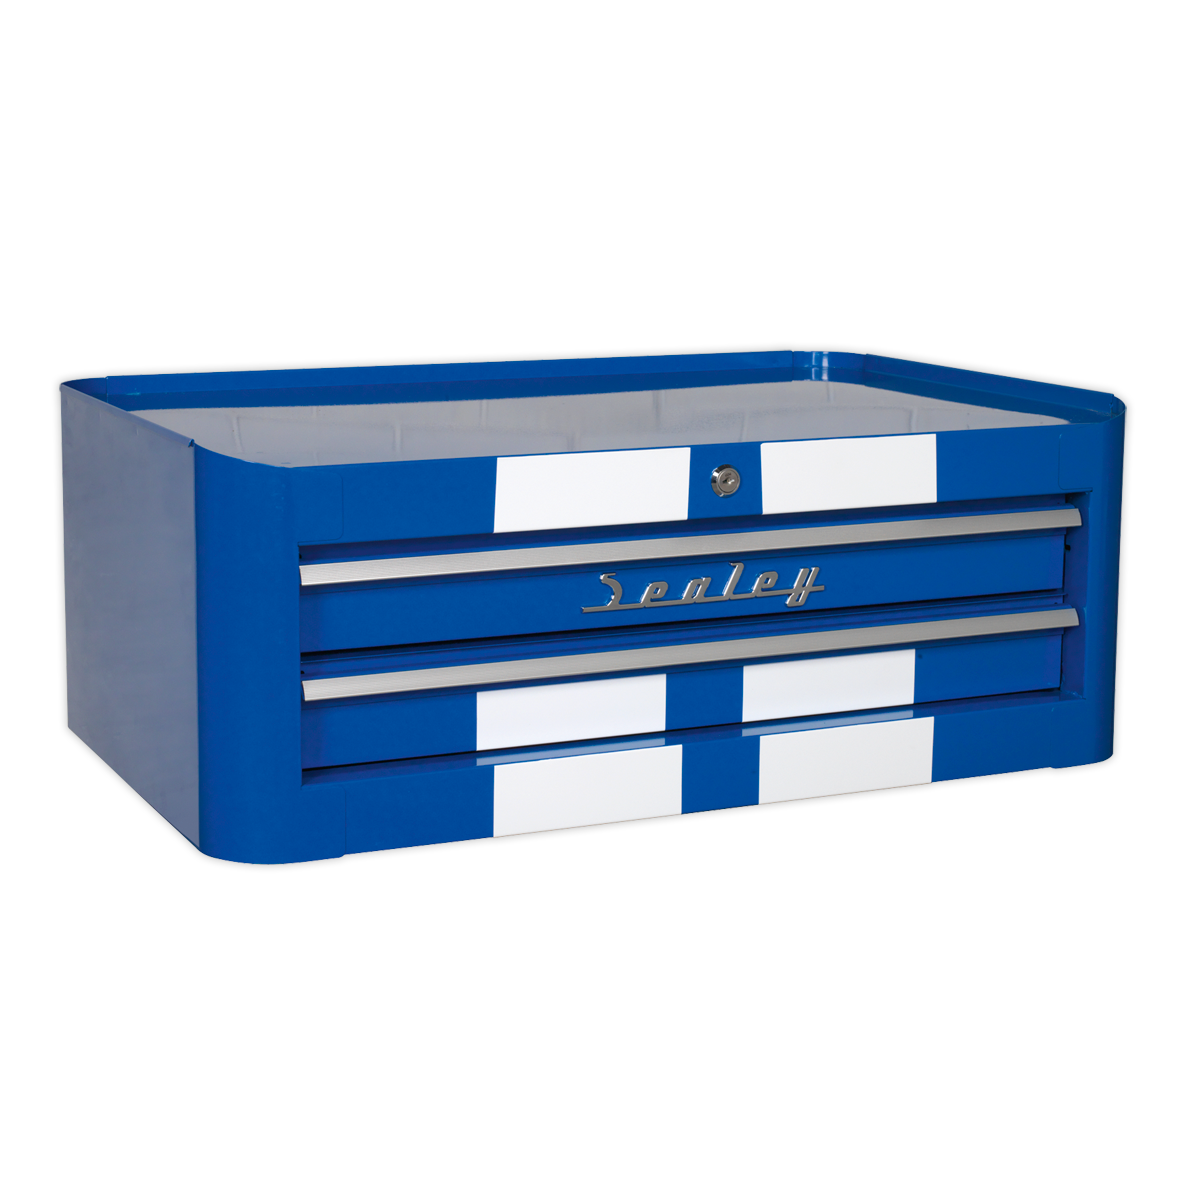 Sealey Mid-Box 2 Drawer Retro Style - Blue with White Stripes